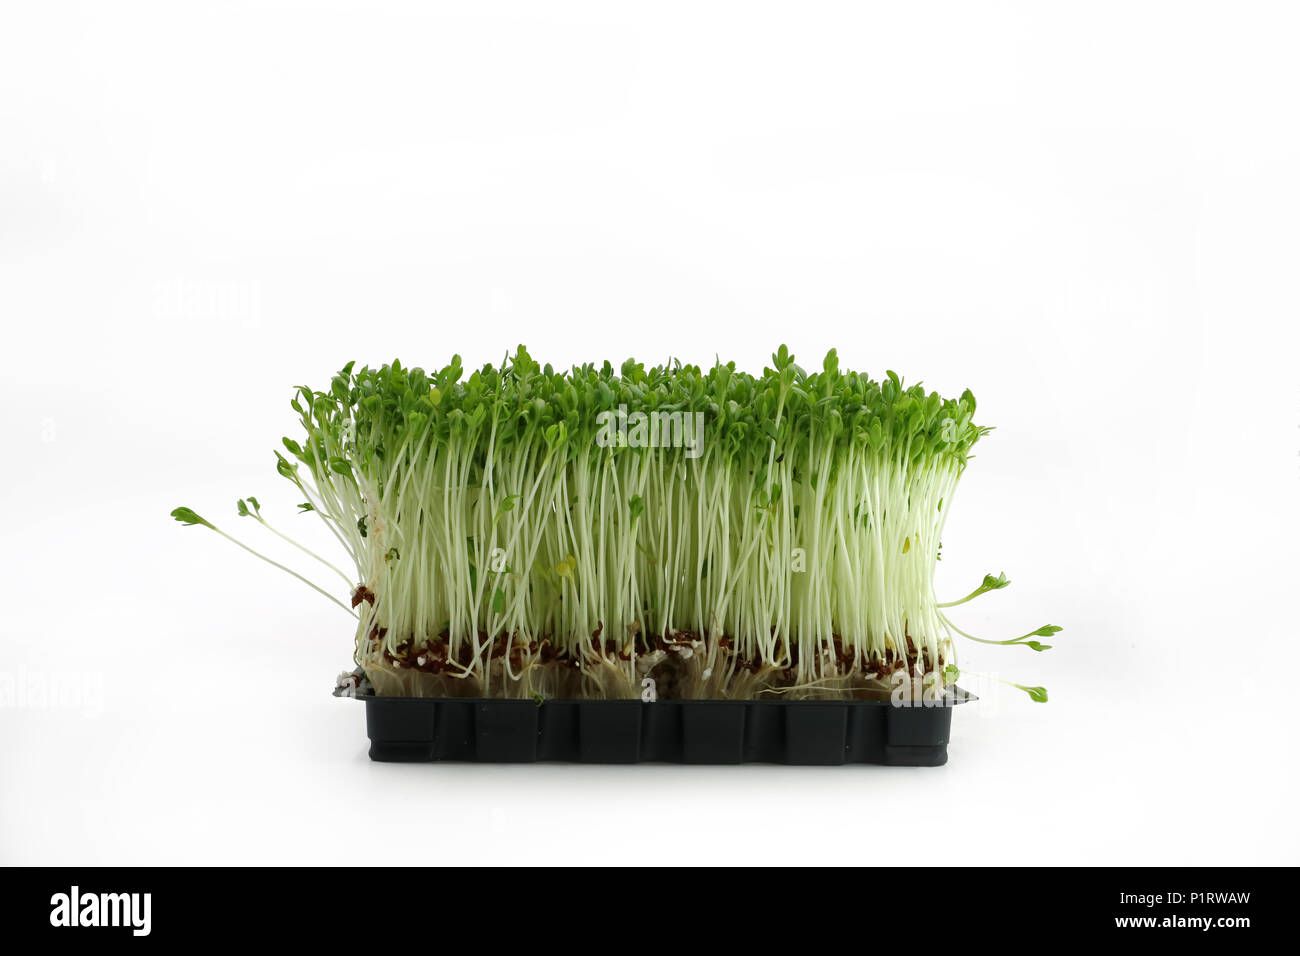 garden cress in black bowl front view isolated on white background Stock Photo